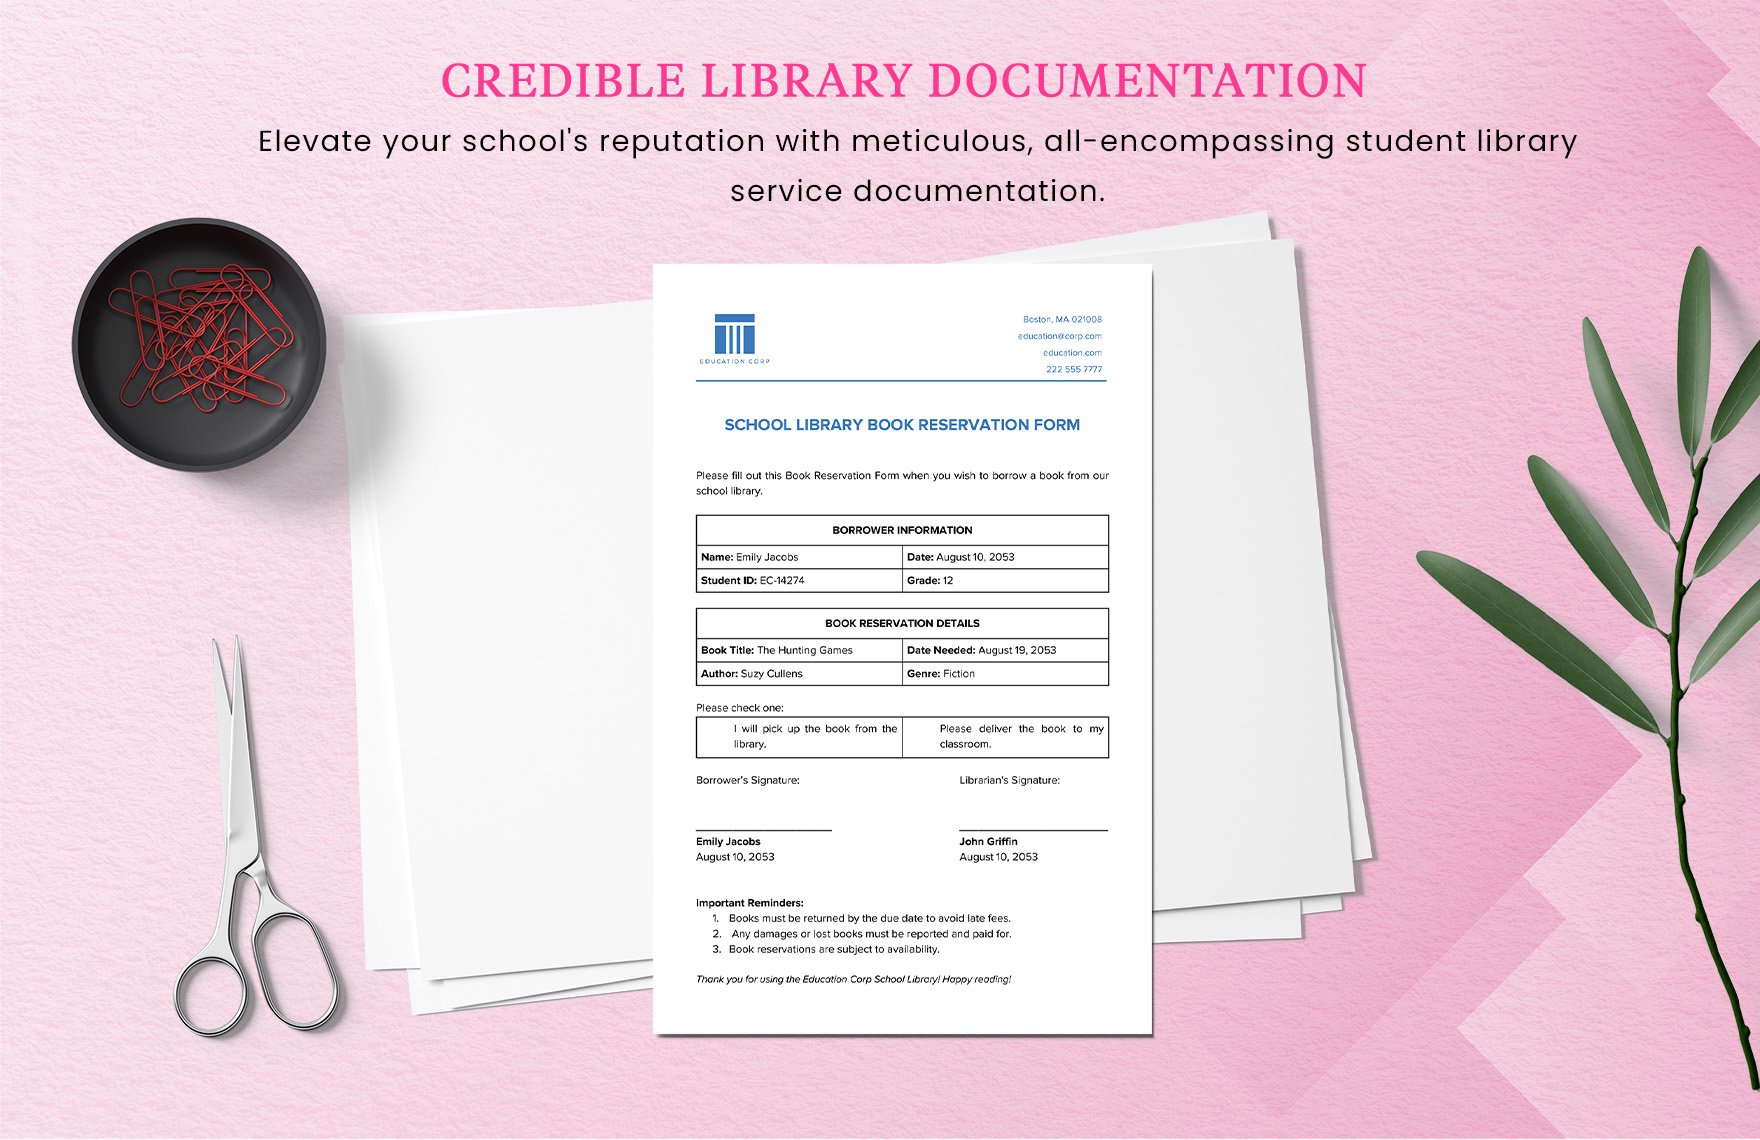 School Library Book Reservation Form Template